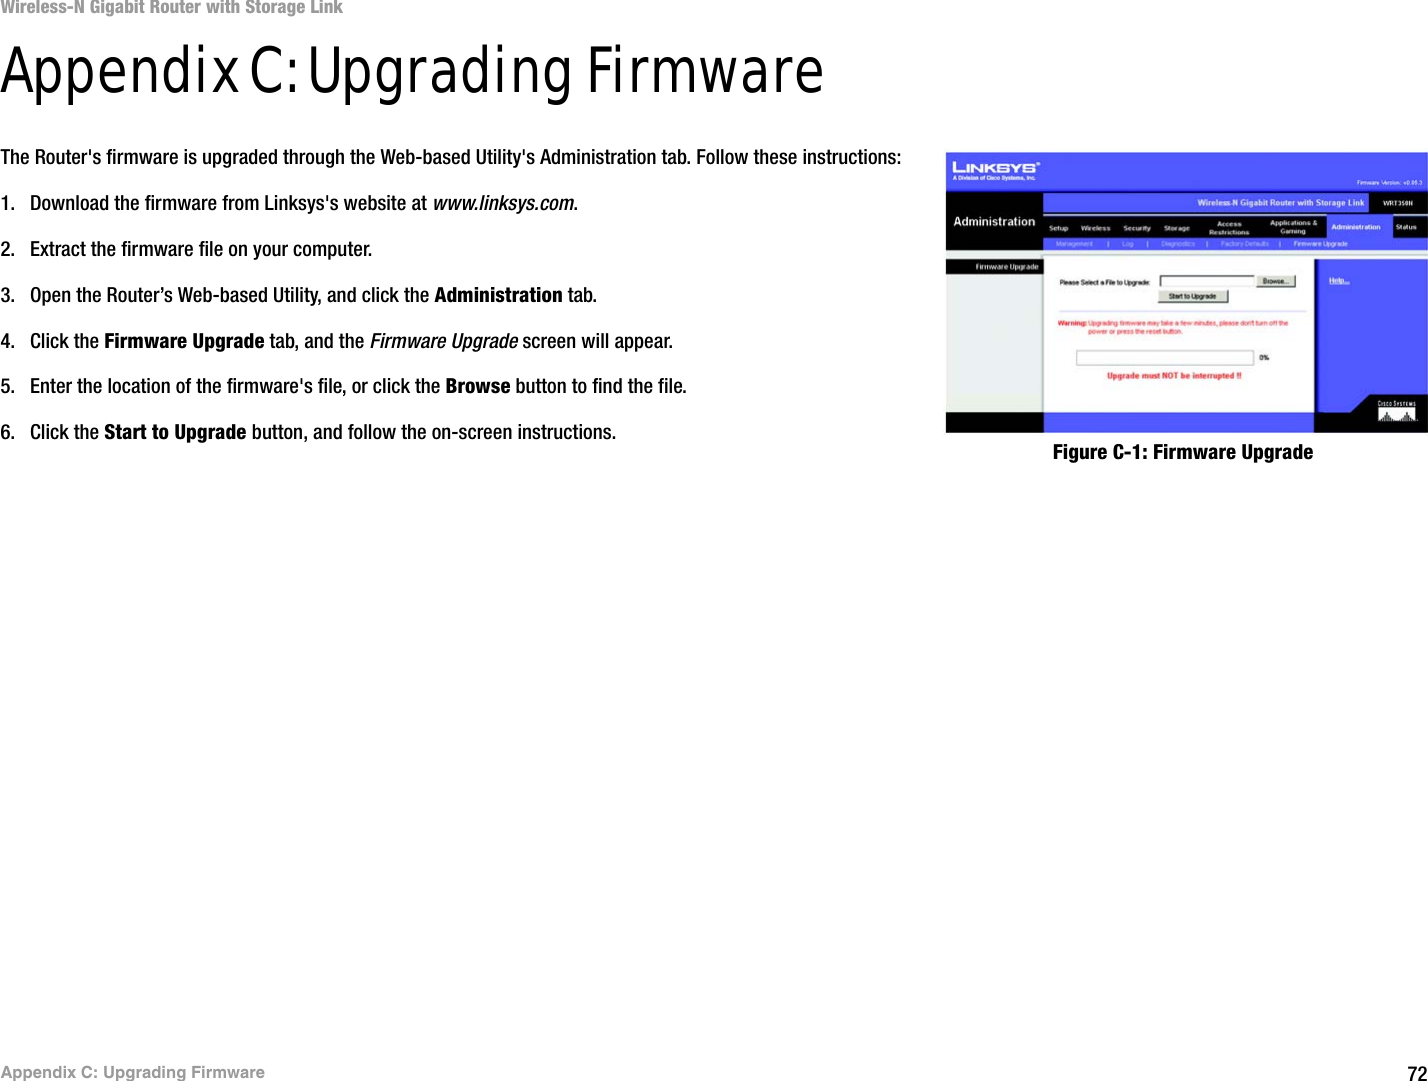 72Appendix C: Upgrading FirmwareWireless-N Gigabit Router with Storage LinkAppendix C: Upgrading FirmwareThe Router&apos;s firmware is upgraded through the Web-based Utility&apos;s Administration tab. Follow these instructions:1. Download the firmware from Linksys&apos;s website at www.linksys.com.2. Extract the firmware file on your computer.3. Open the Router’s Web-based Utility, and click the Administration tab.4. Click the Firmware Upgrade tab, and the Firmware Upgrade screen will appear.5. Enter the location of the firmware&apos;s file, or click the Browse button to find the file.6. Click the Start to Upgrade button, and follow the on-screen instructions.Figure C-1: Firmware Upgrade